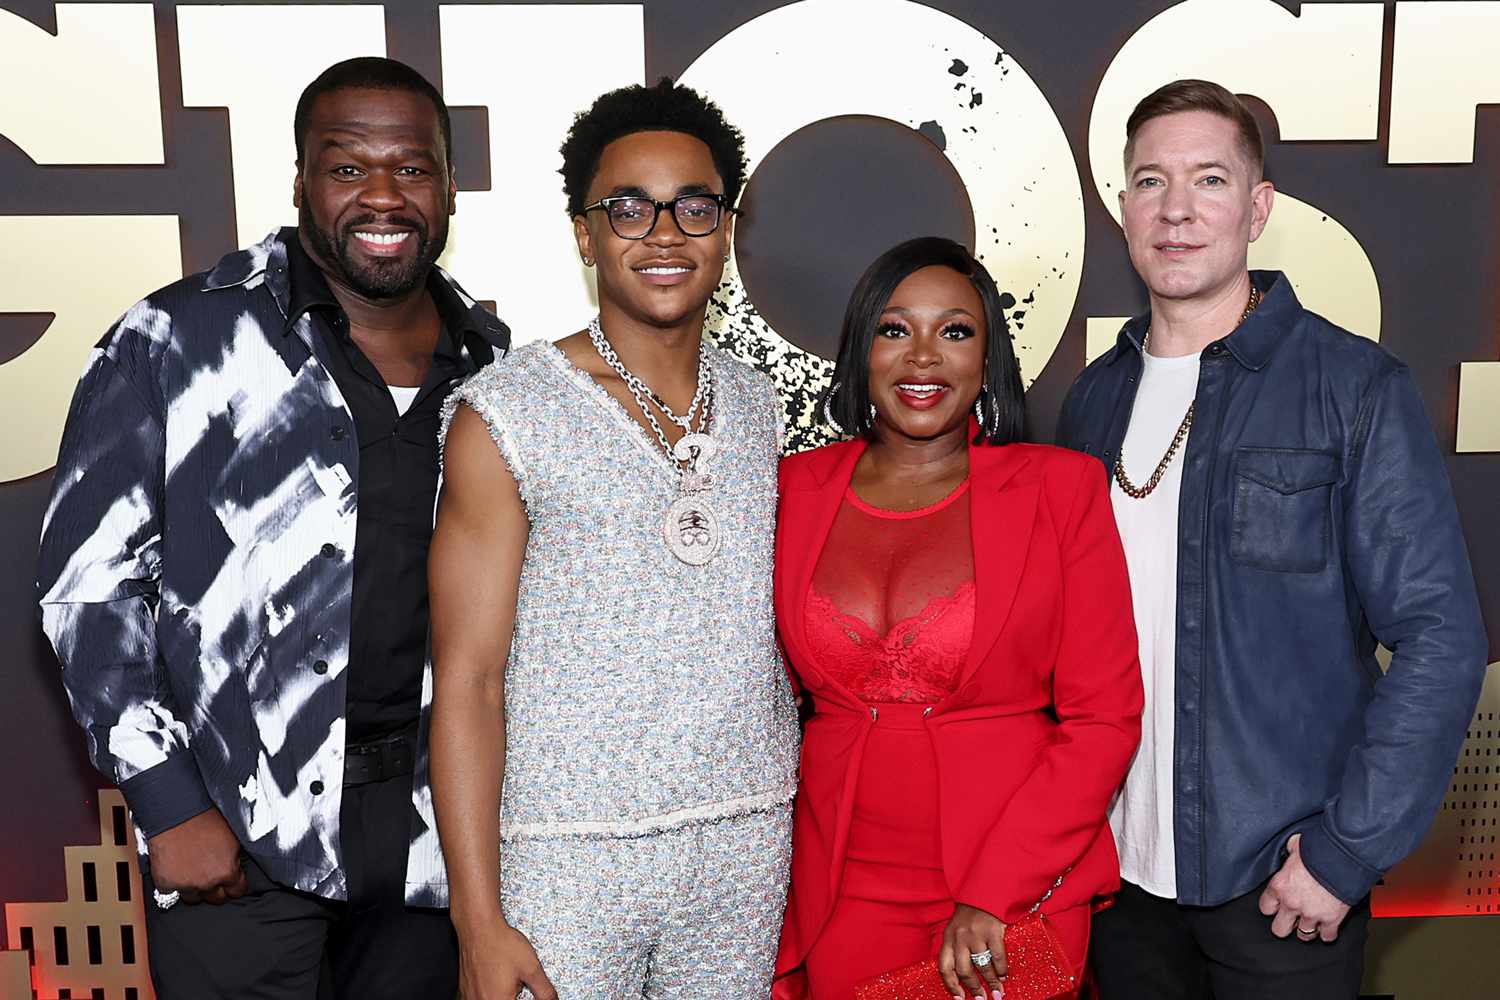 Naturi Naughton, Joseph Sikora and the Cast of Power Celebrate Its 'Epic' 10th Anniversary: 'Long Time Coming' (Exclusive)